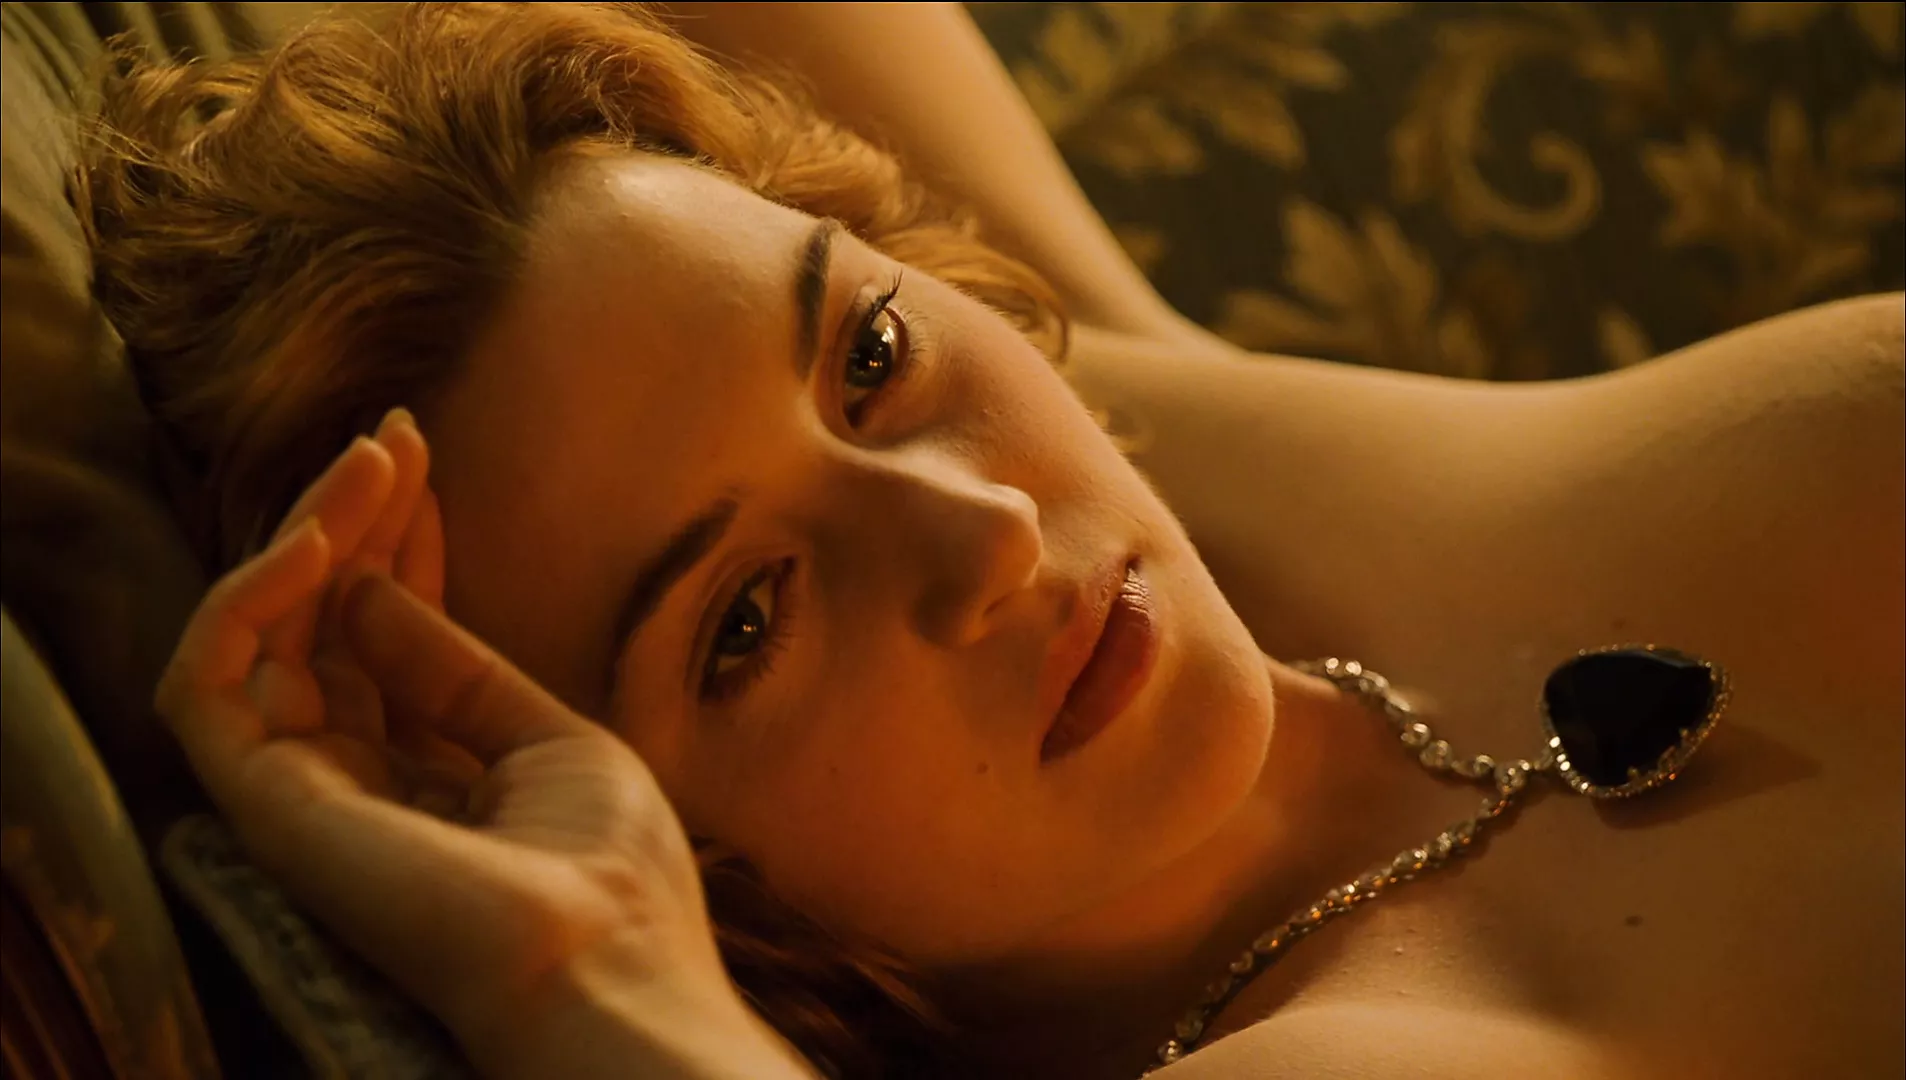 Naked Titanic Porn - Kate Winslet - titanic Open Matte Version watch online or download